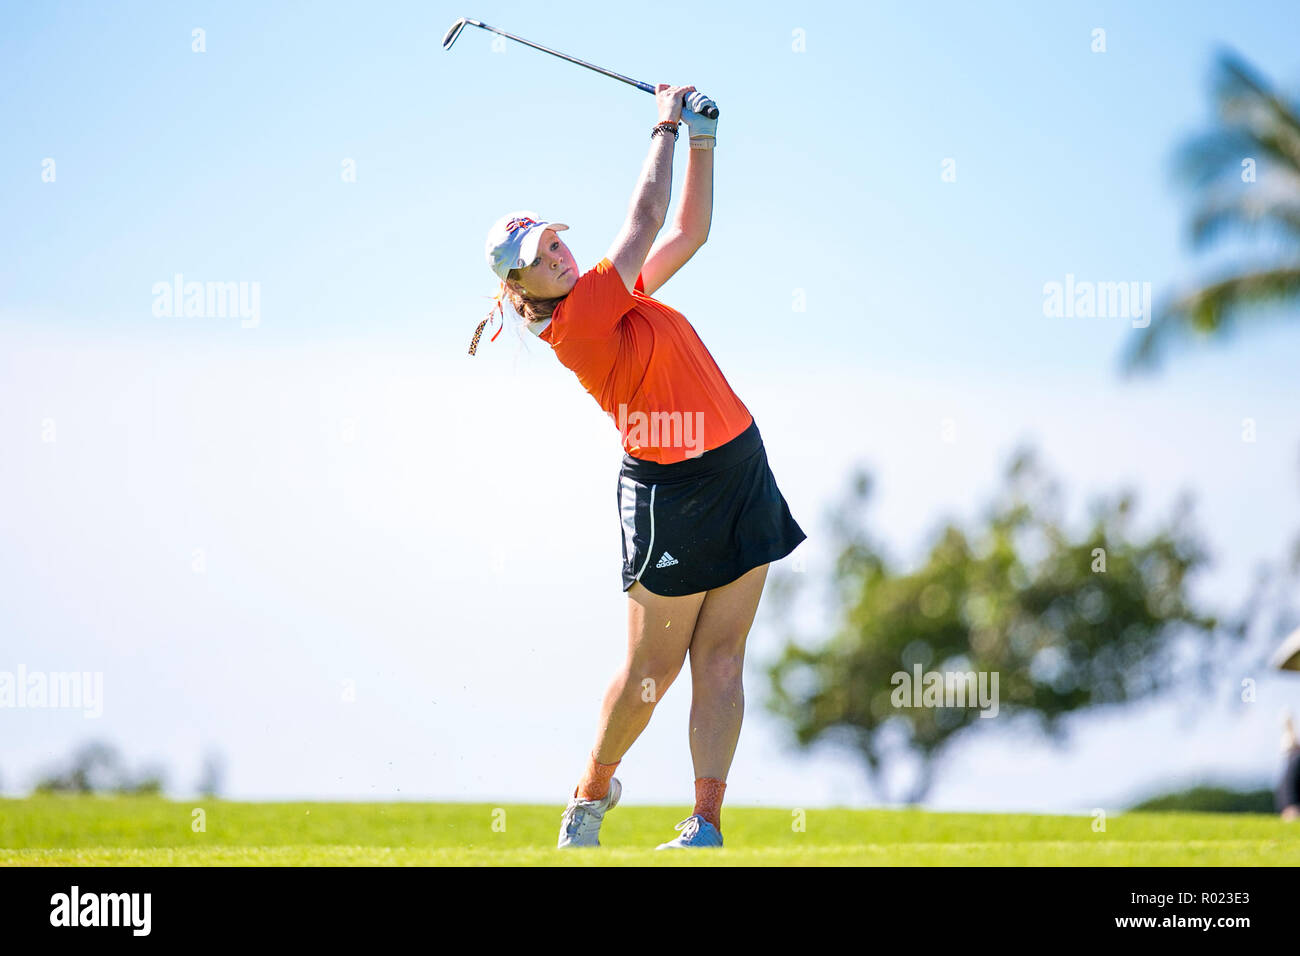 October 31, 2018 - Sam Houston State golfer Jenna Phillips hits her tee shot on the par 3 8th hole during the final day Rainbow Wahine Invite at Kapolei Golf Course in Kapolei, HI. The tournament was shortened to one day due to heavy rains the day before. -Glenn Yoza/CSM Stock Photo